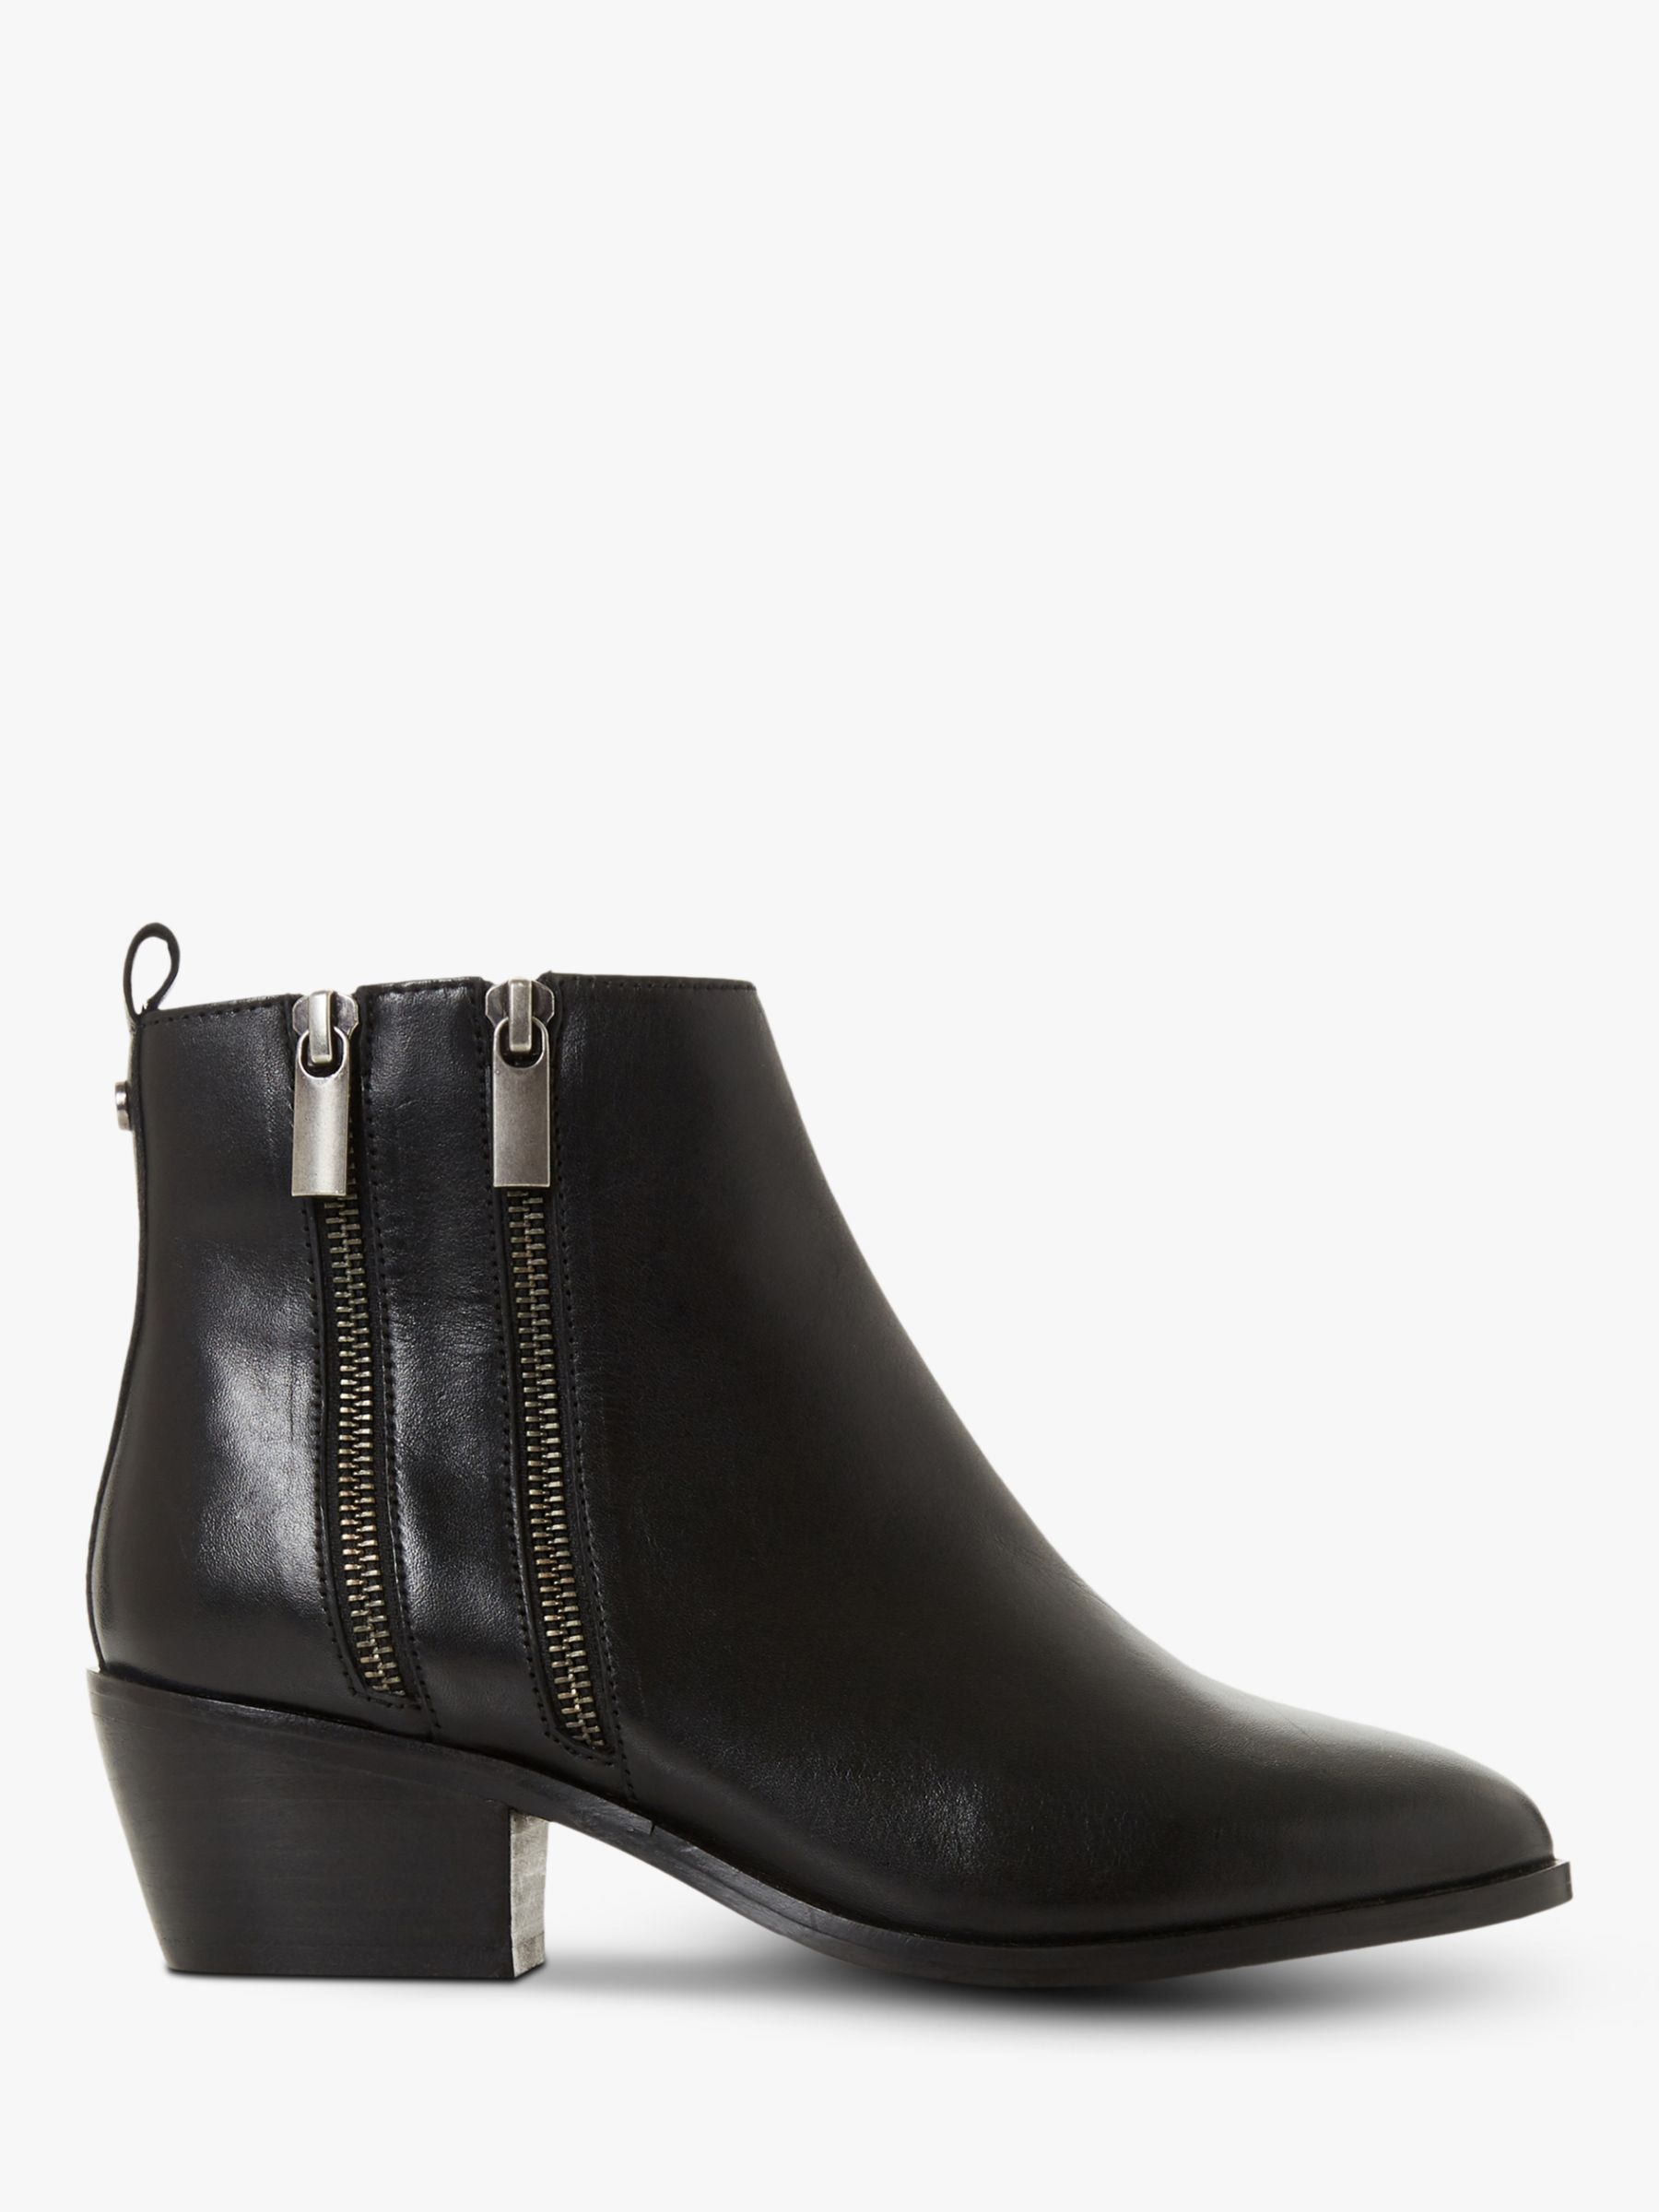 Dune Presleigh Leather Double Zip Ankle Boots